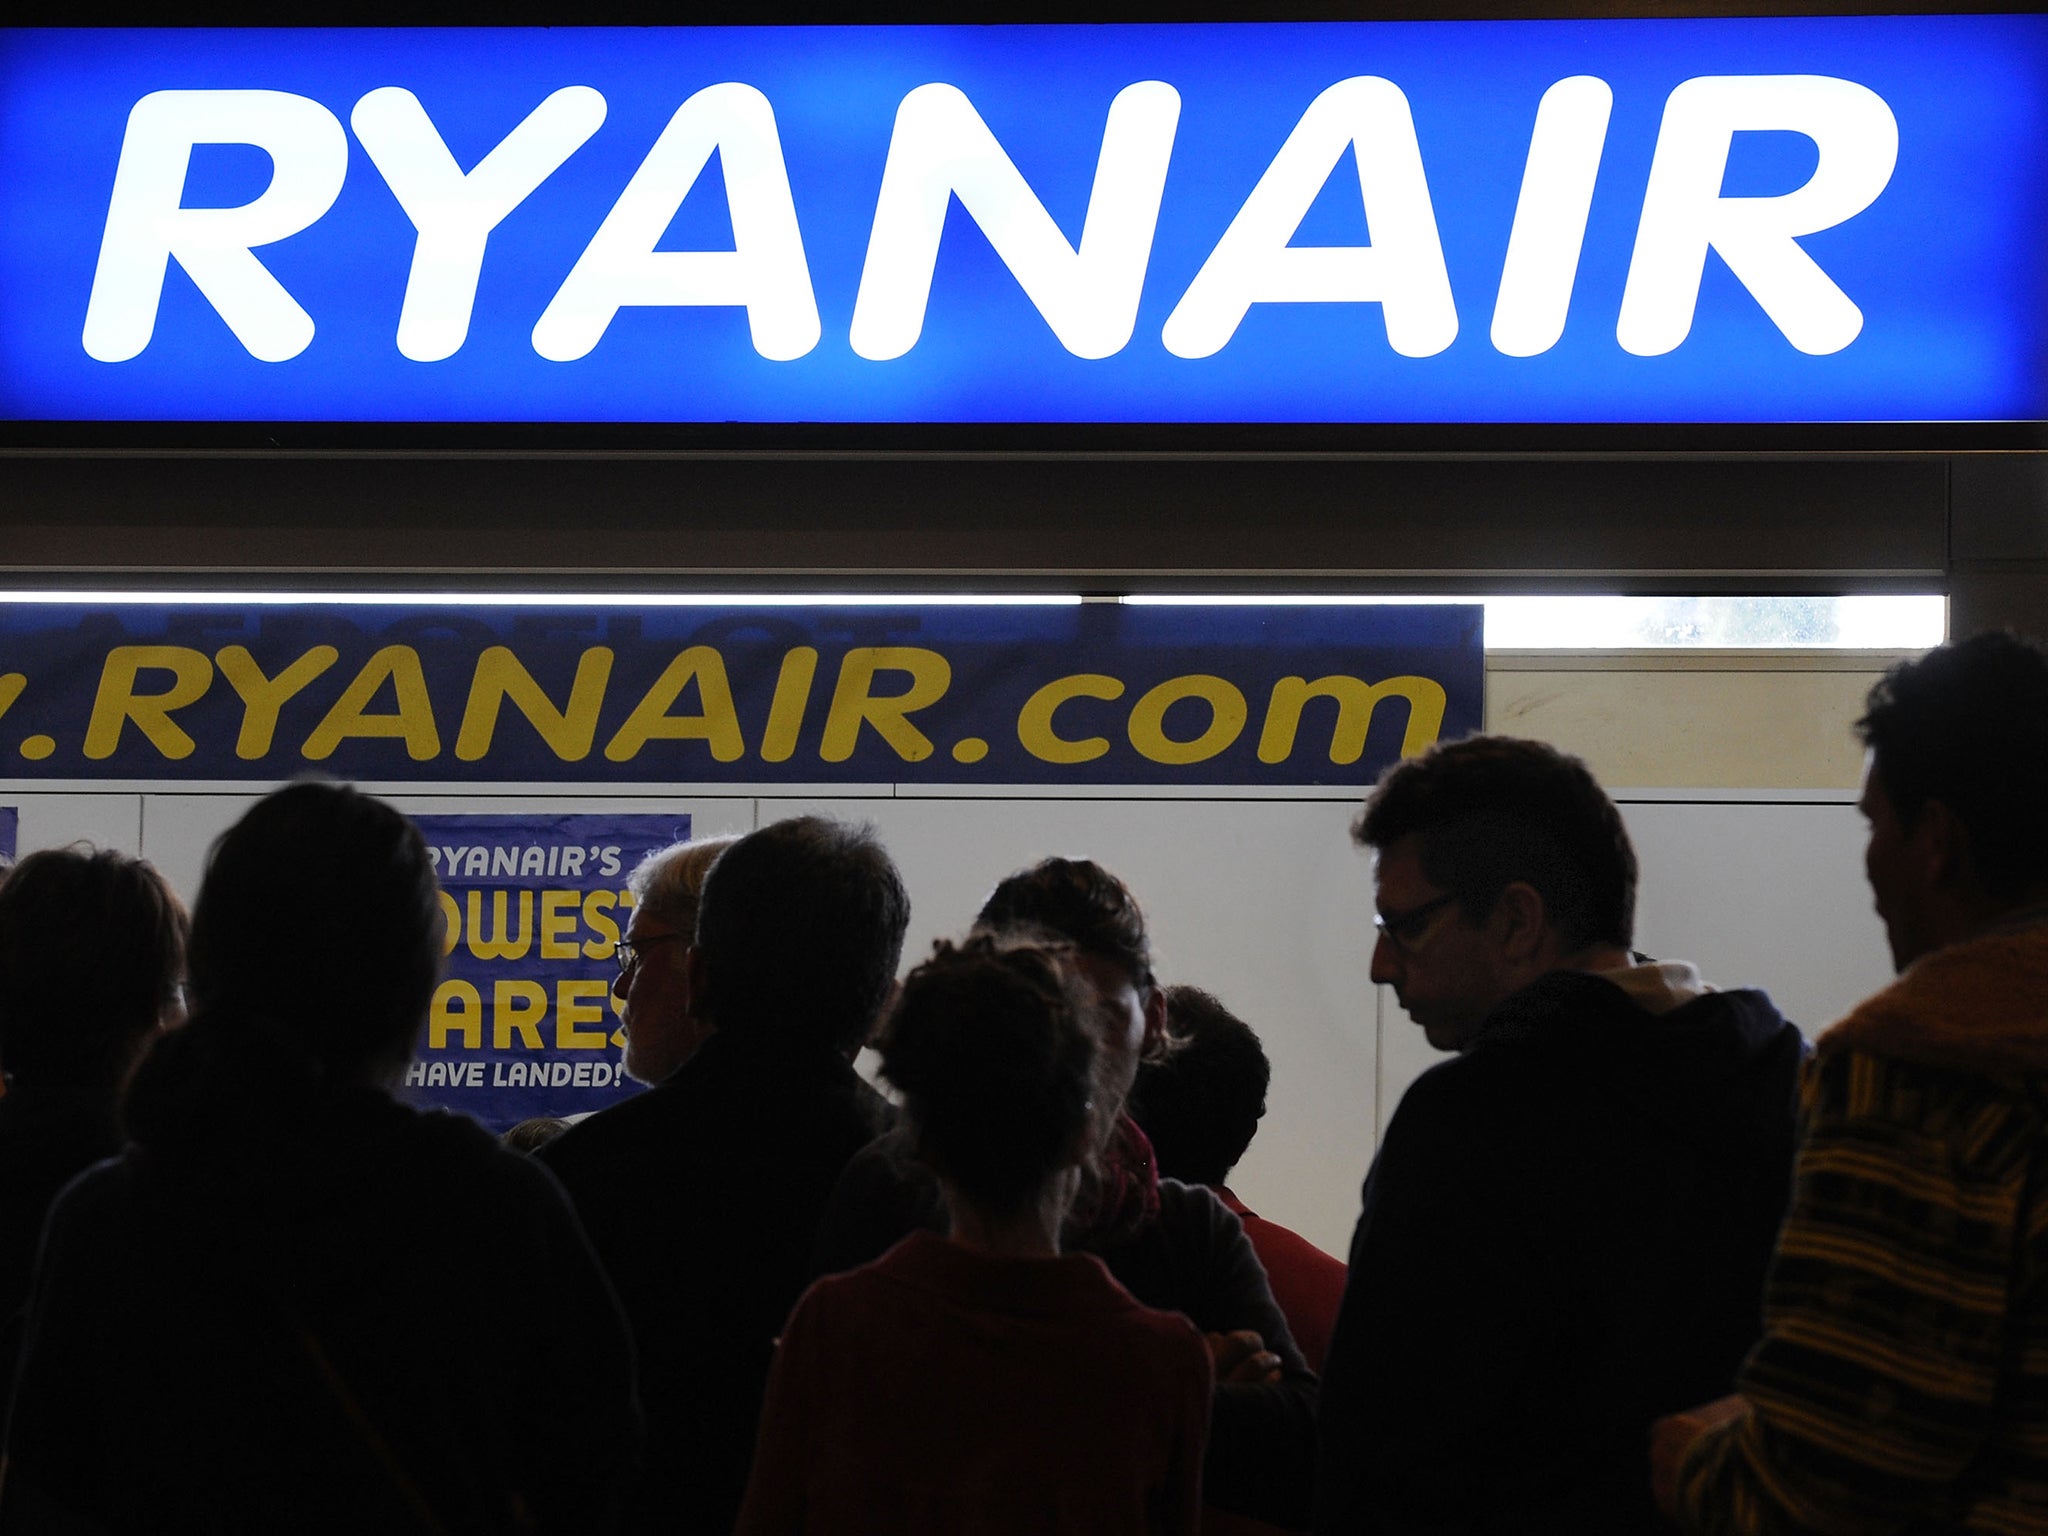 Ryanair said the upgrade fees were standard as there were only 28 seats left on the flight